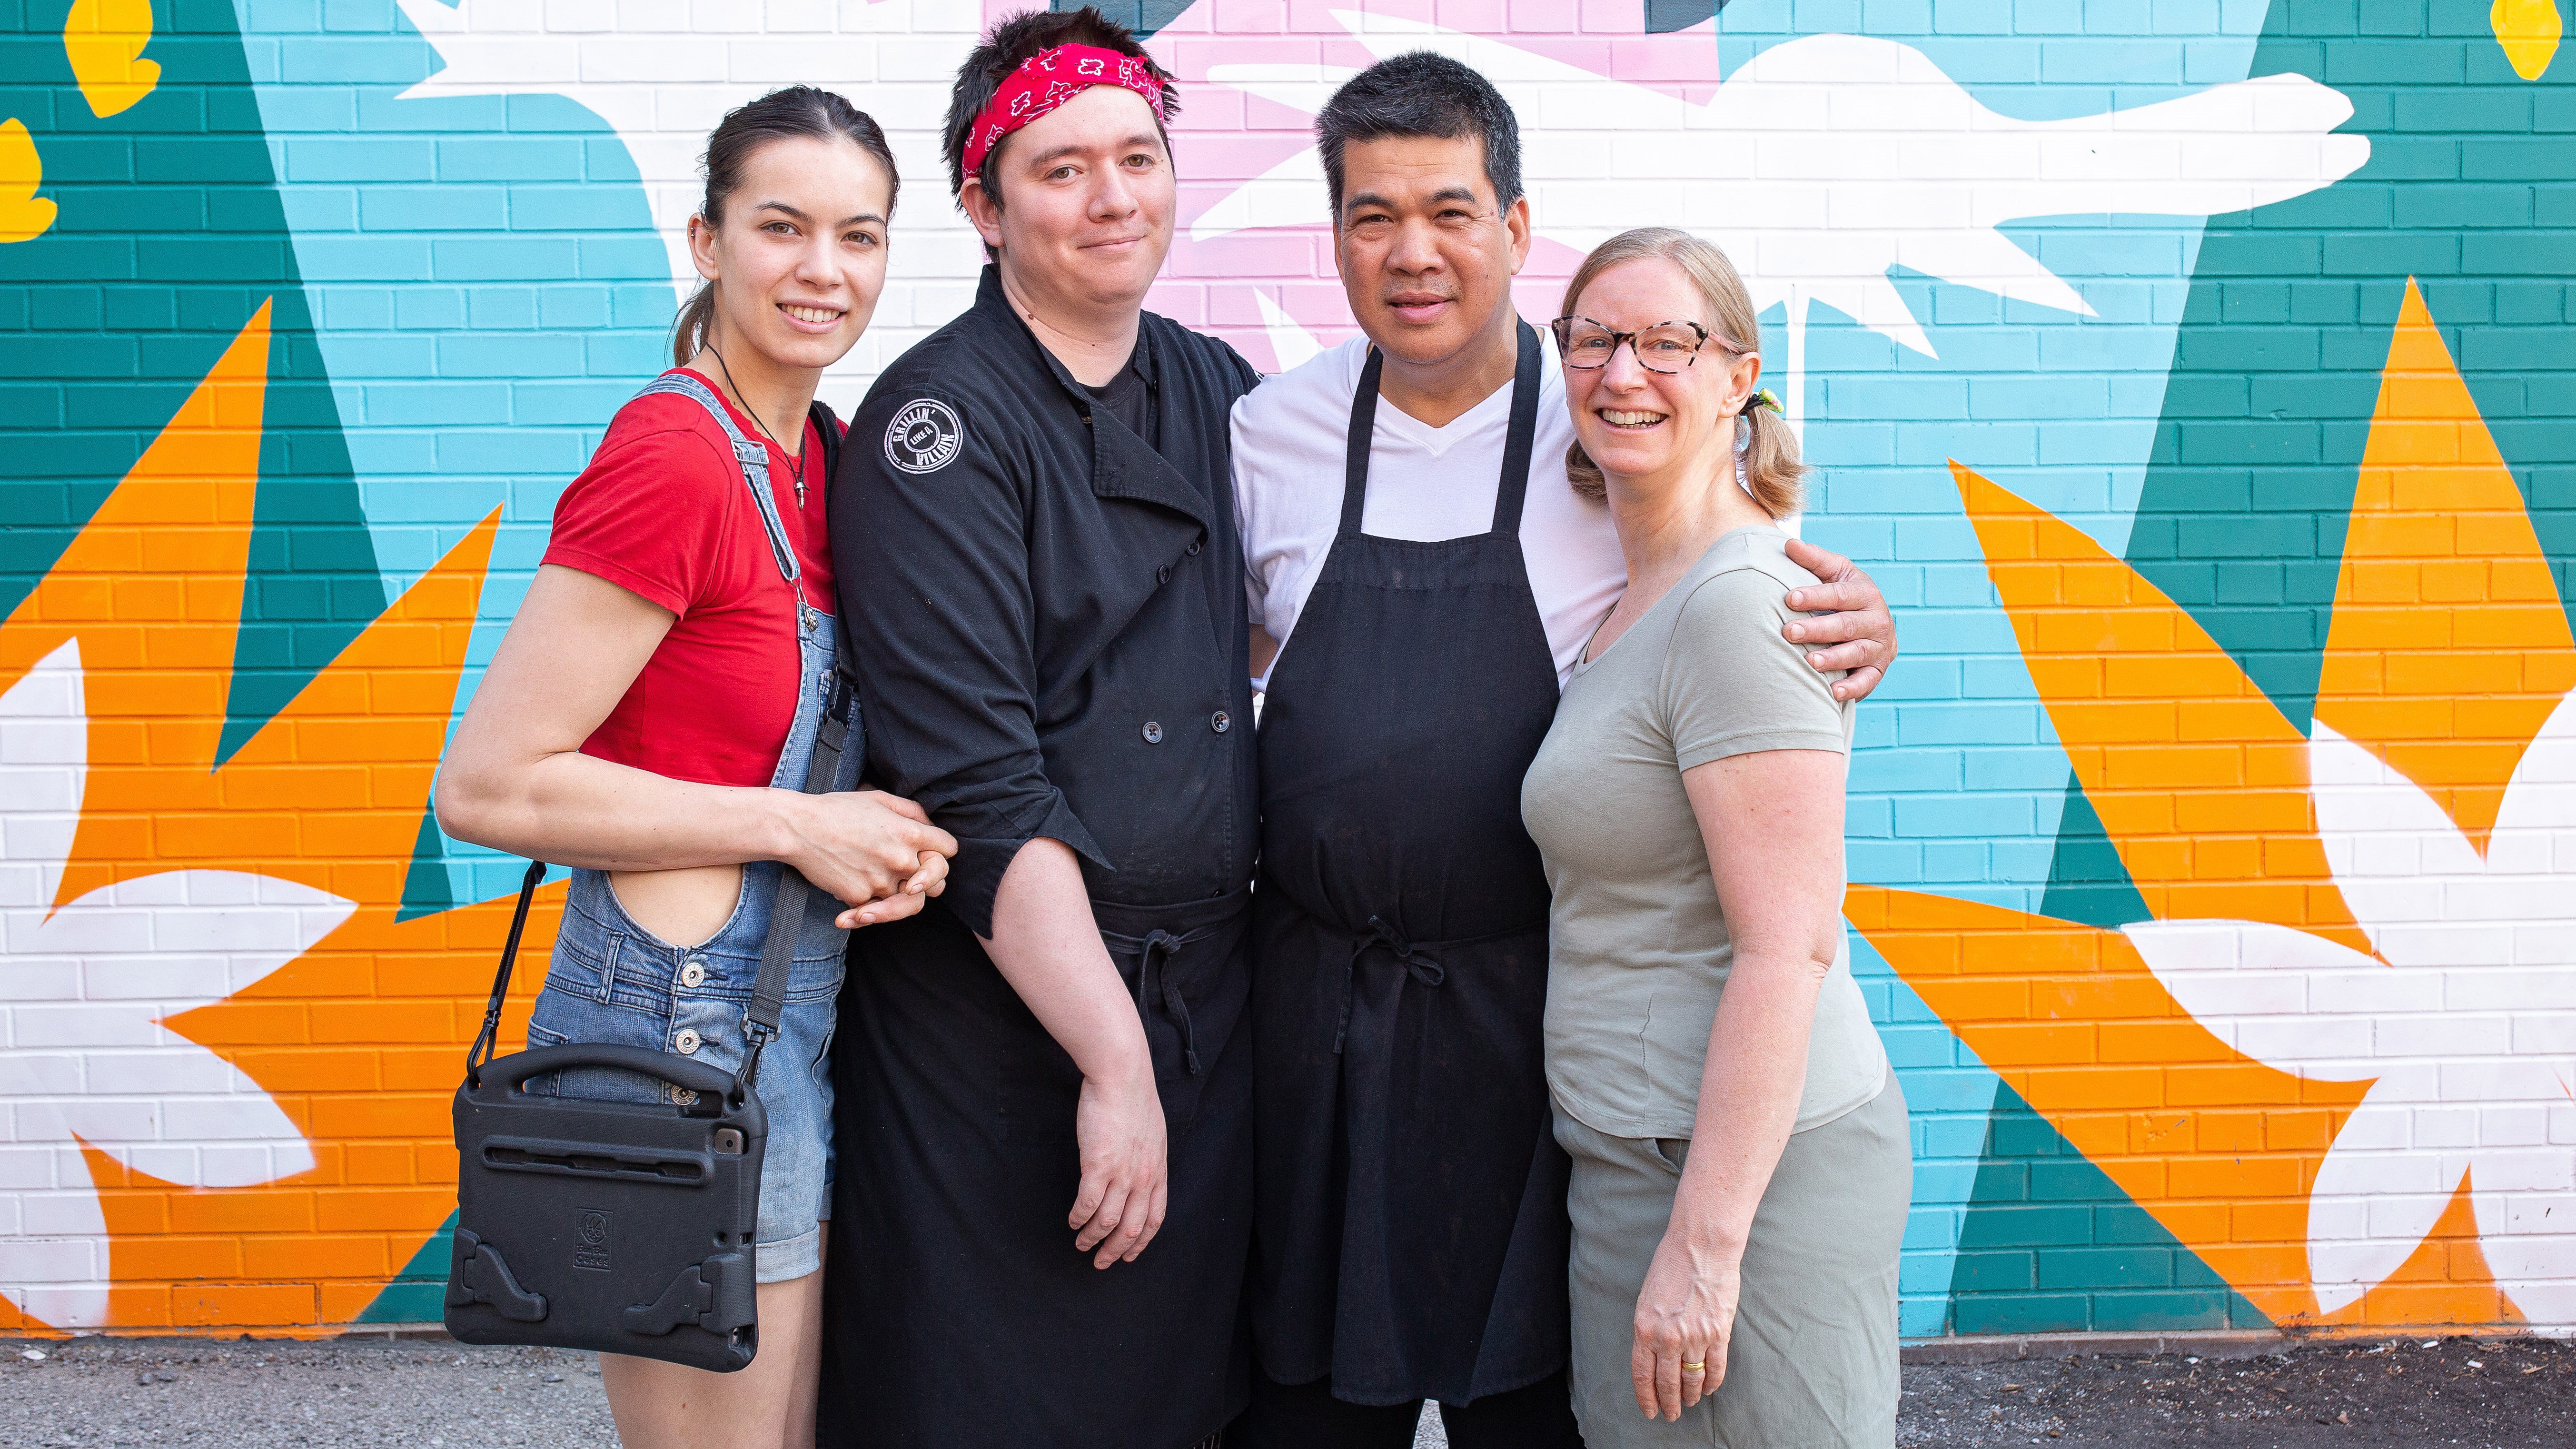 Alison and Noel Galvan, owners of the Food and Art Cafe, accompanied by their adult children, Phoebe and James, standing in front of a vibrant mural